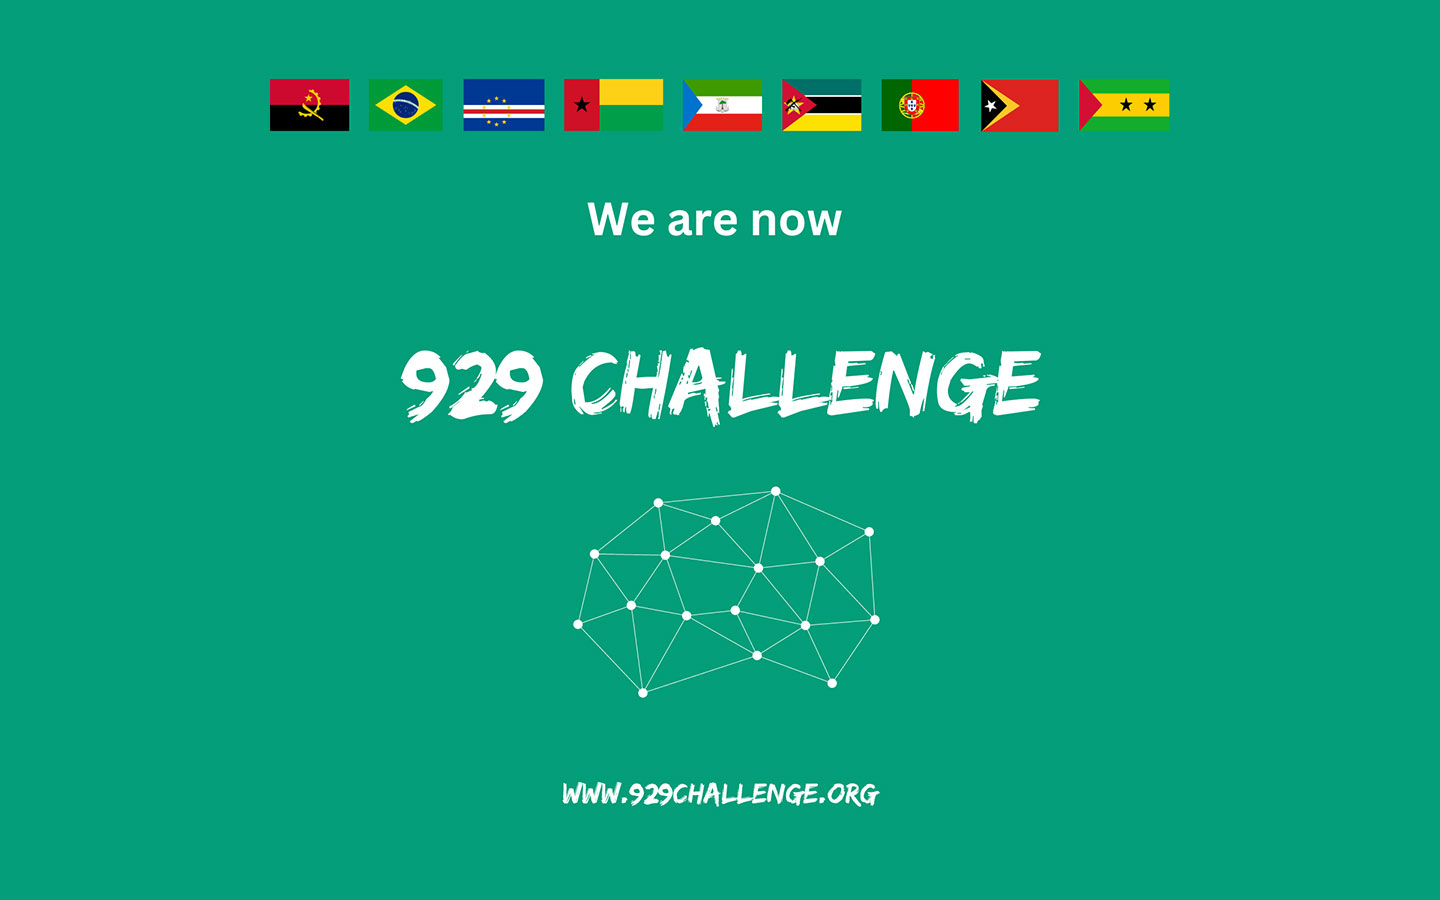 The 928 Challenge is officially the 929 Challenge from today